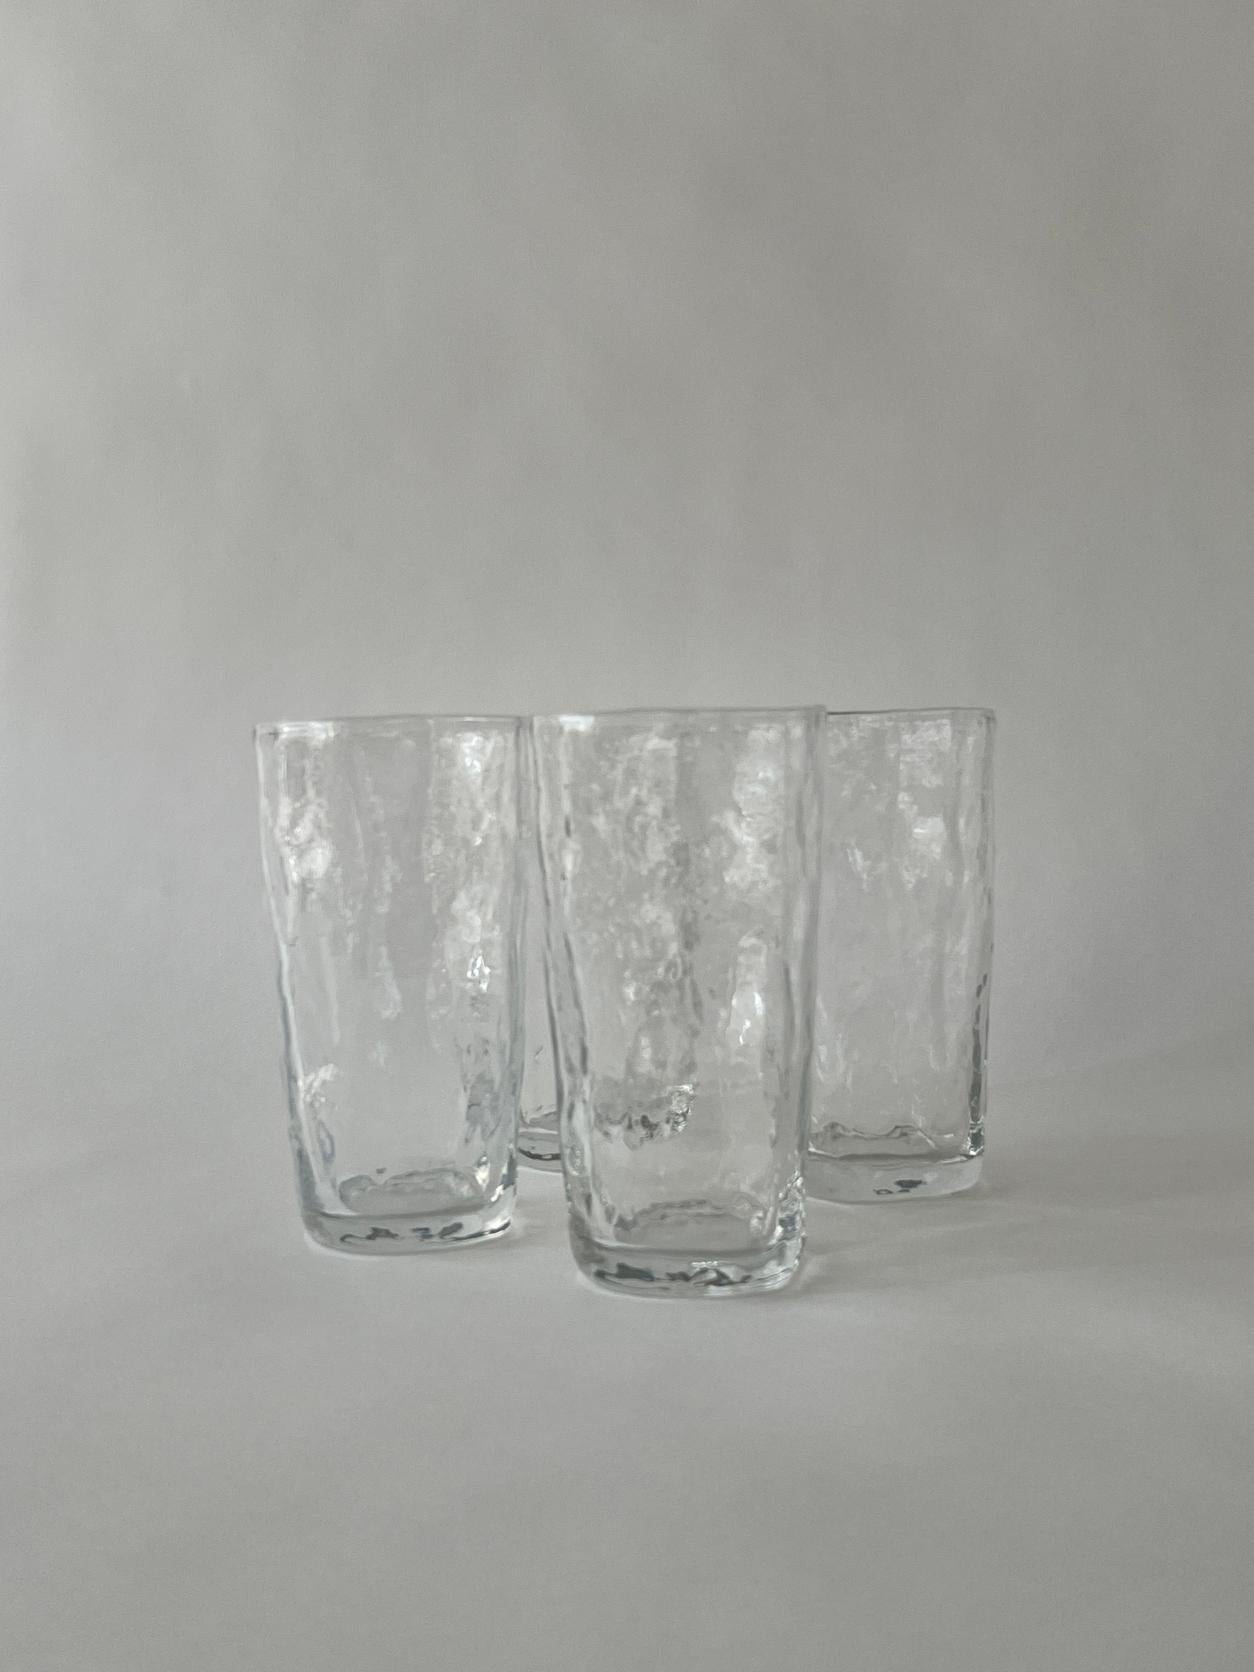 20th century textured drinking glasses expertly crafted. Perfect size and beautiful design to add to your kitchen set.

Set of 4
Measures: 3